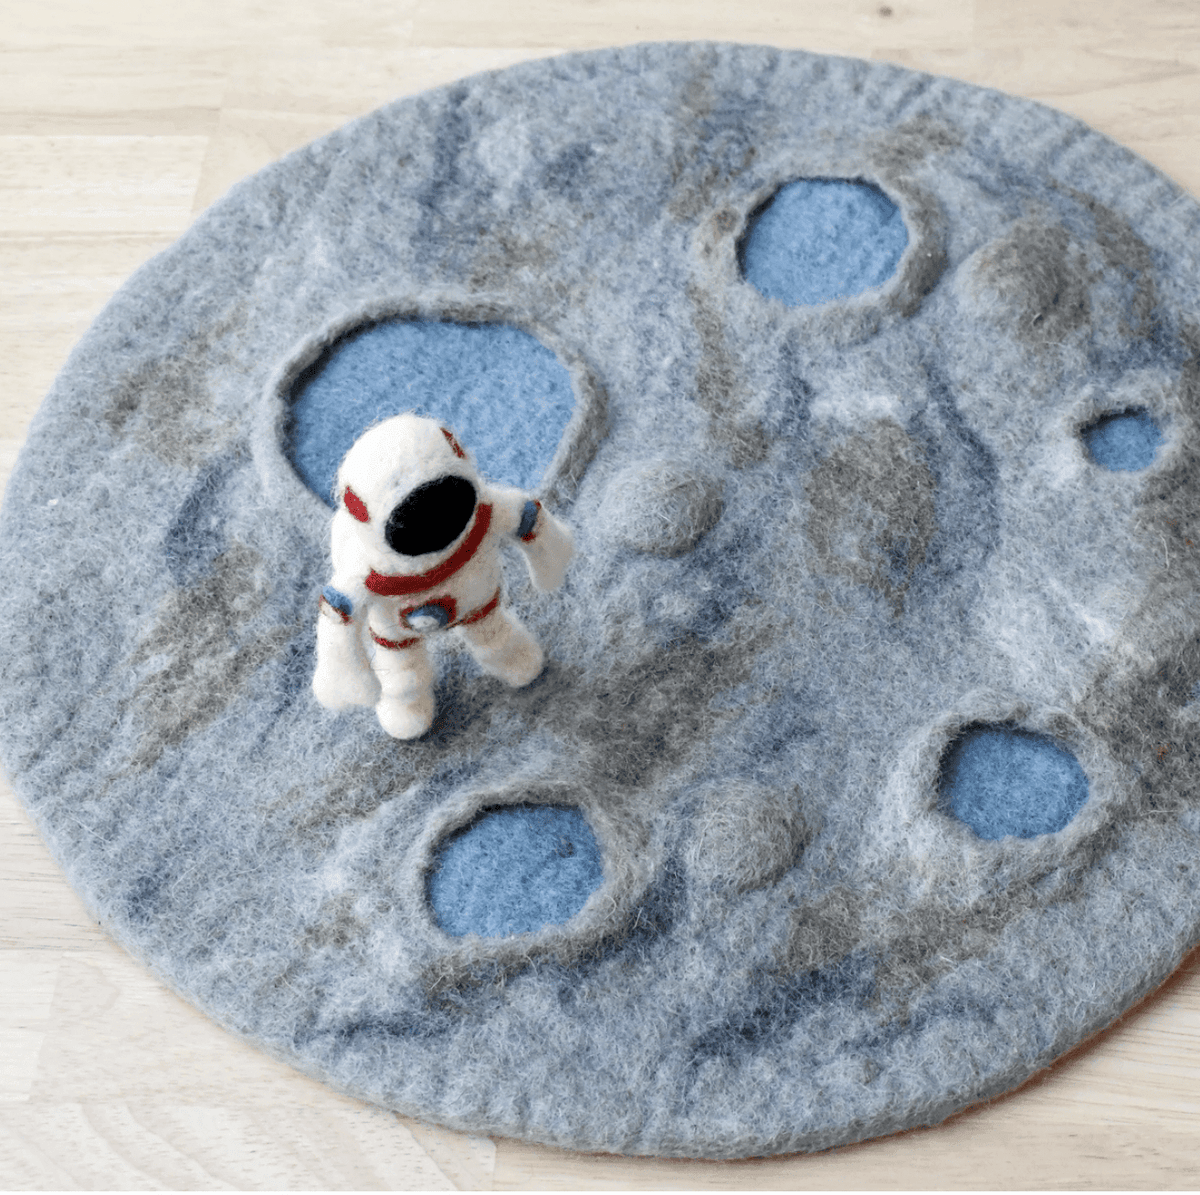 The Curated Parcel - Play Mat // Moon Crater with Astronaut Space 